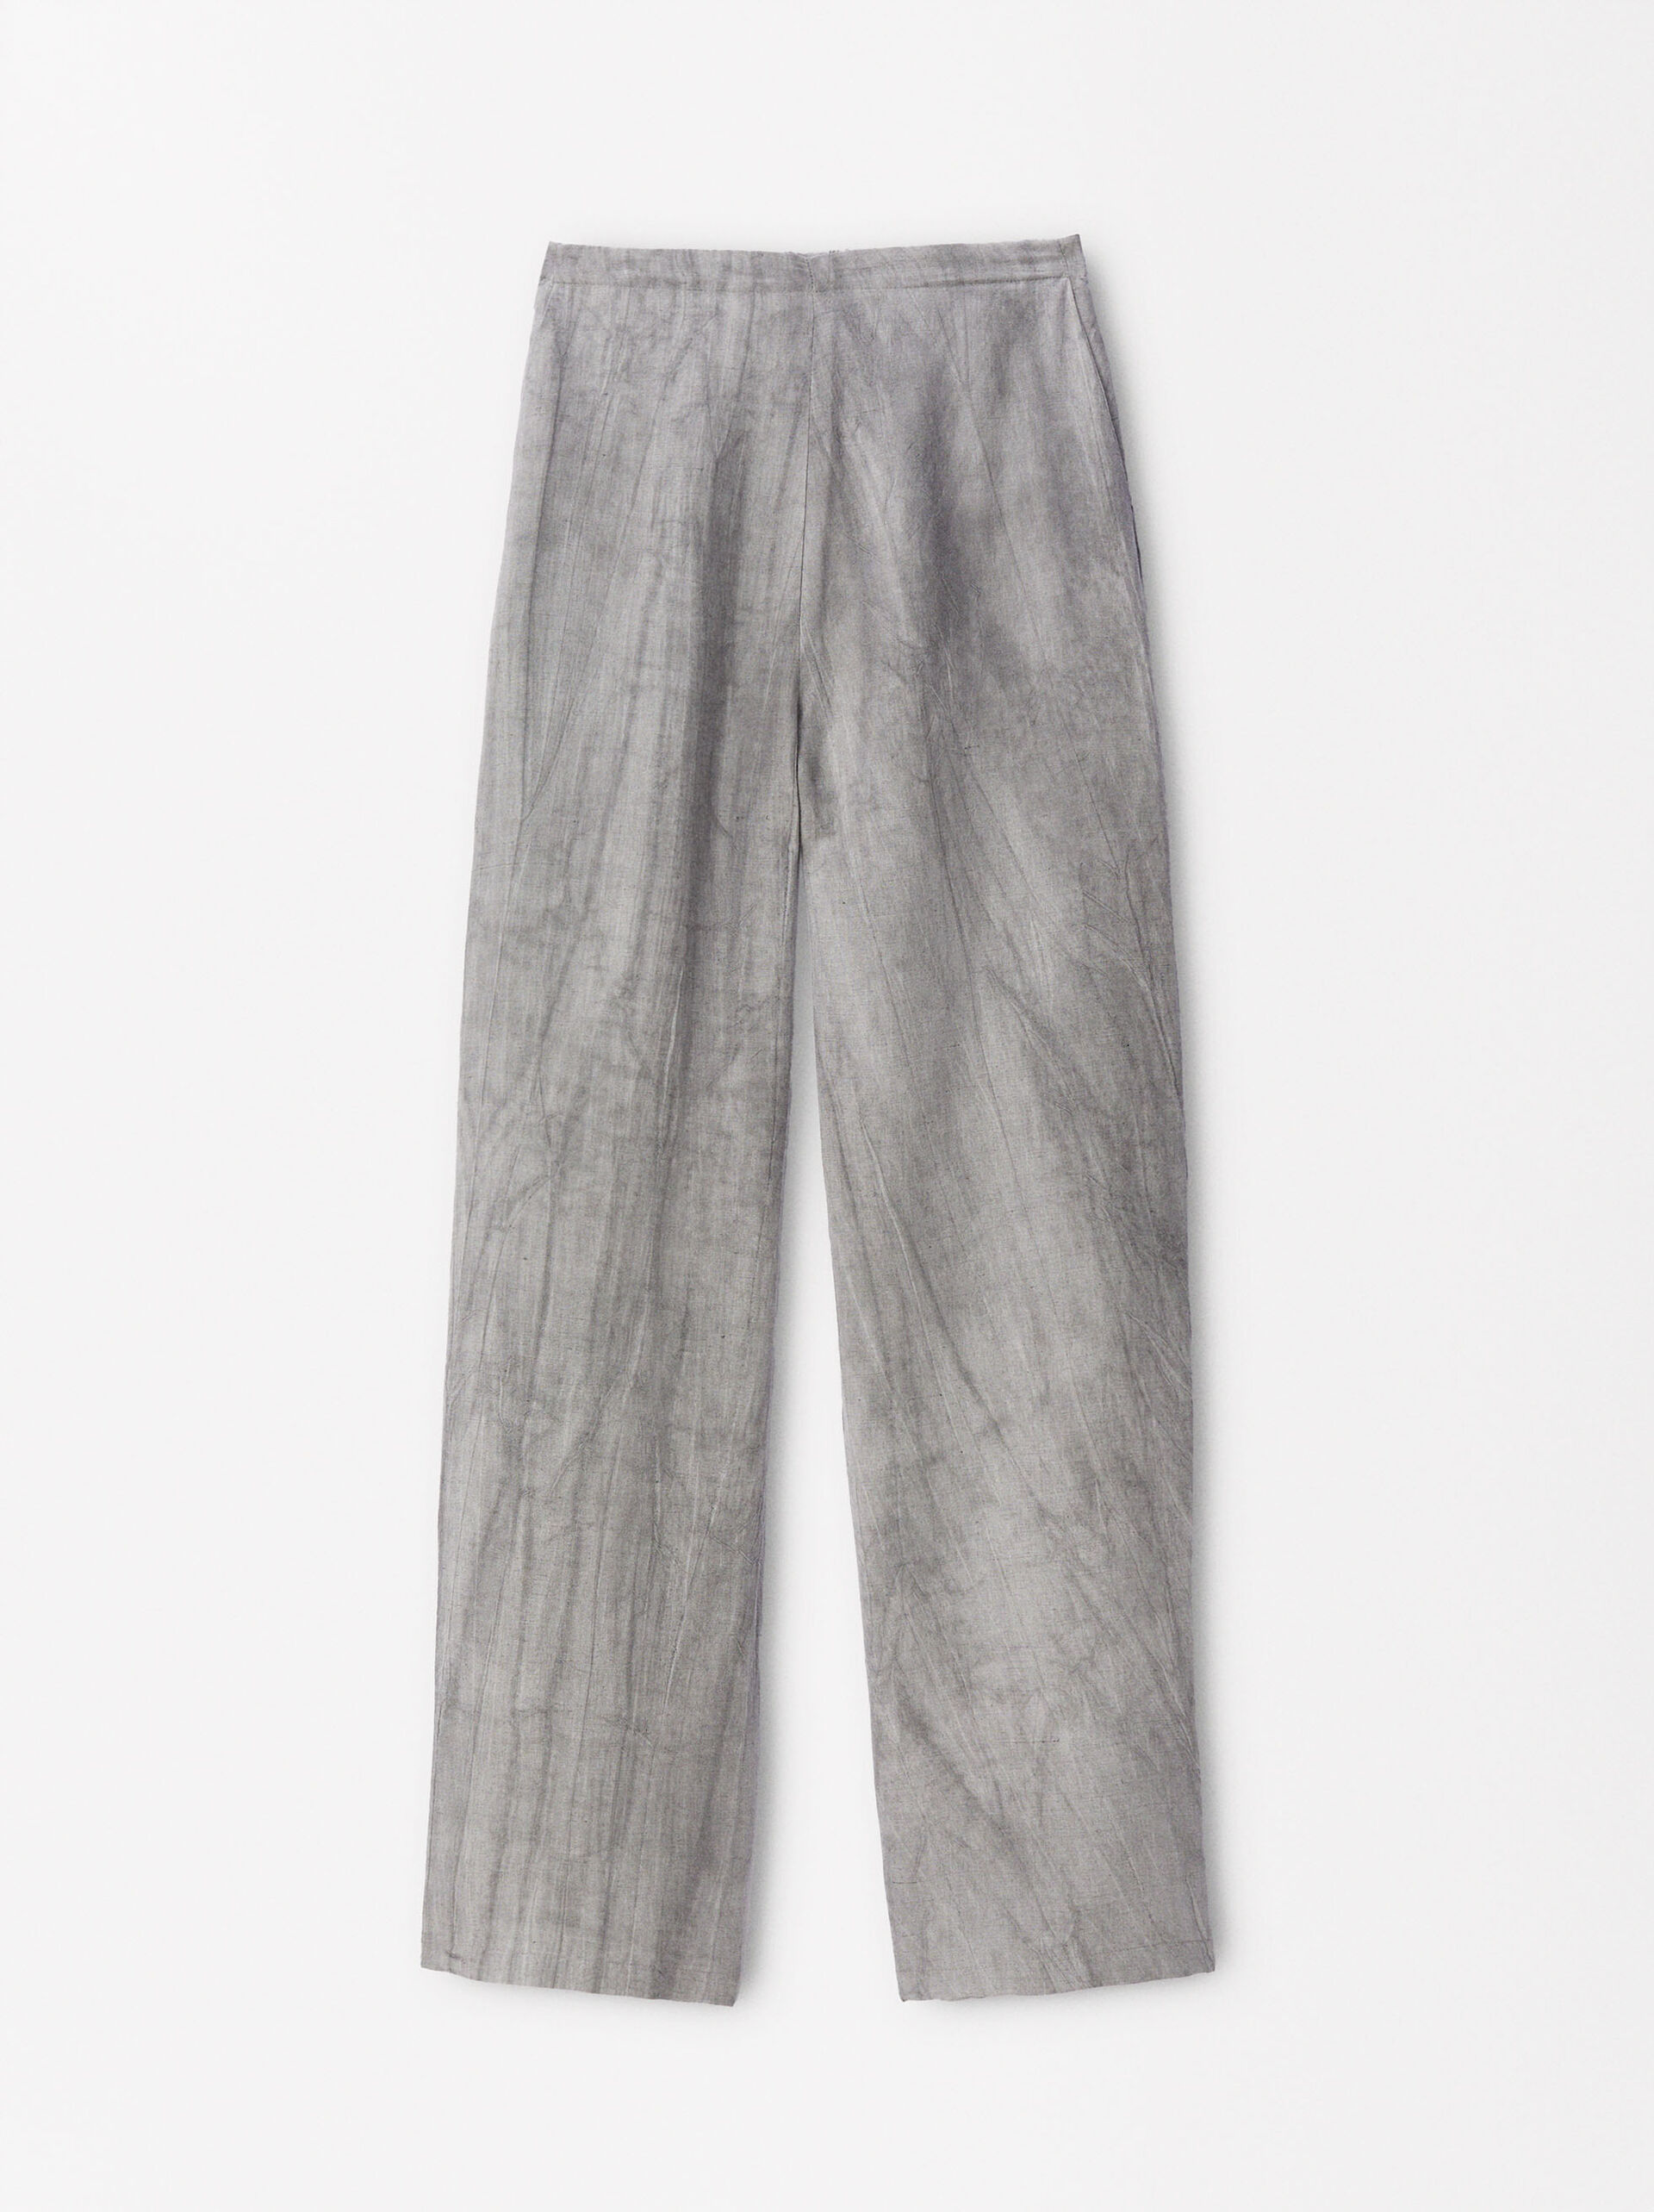 Printed Loose-Fitting Trousers image number 0.0